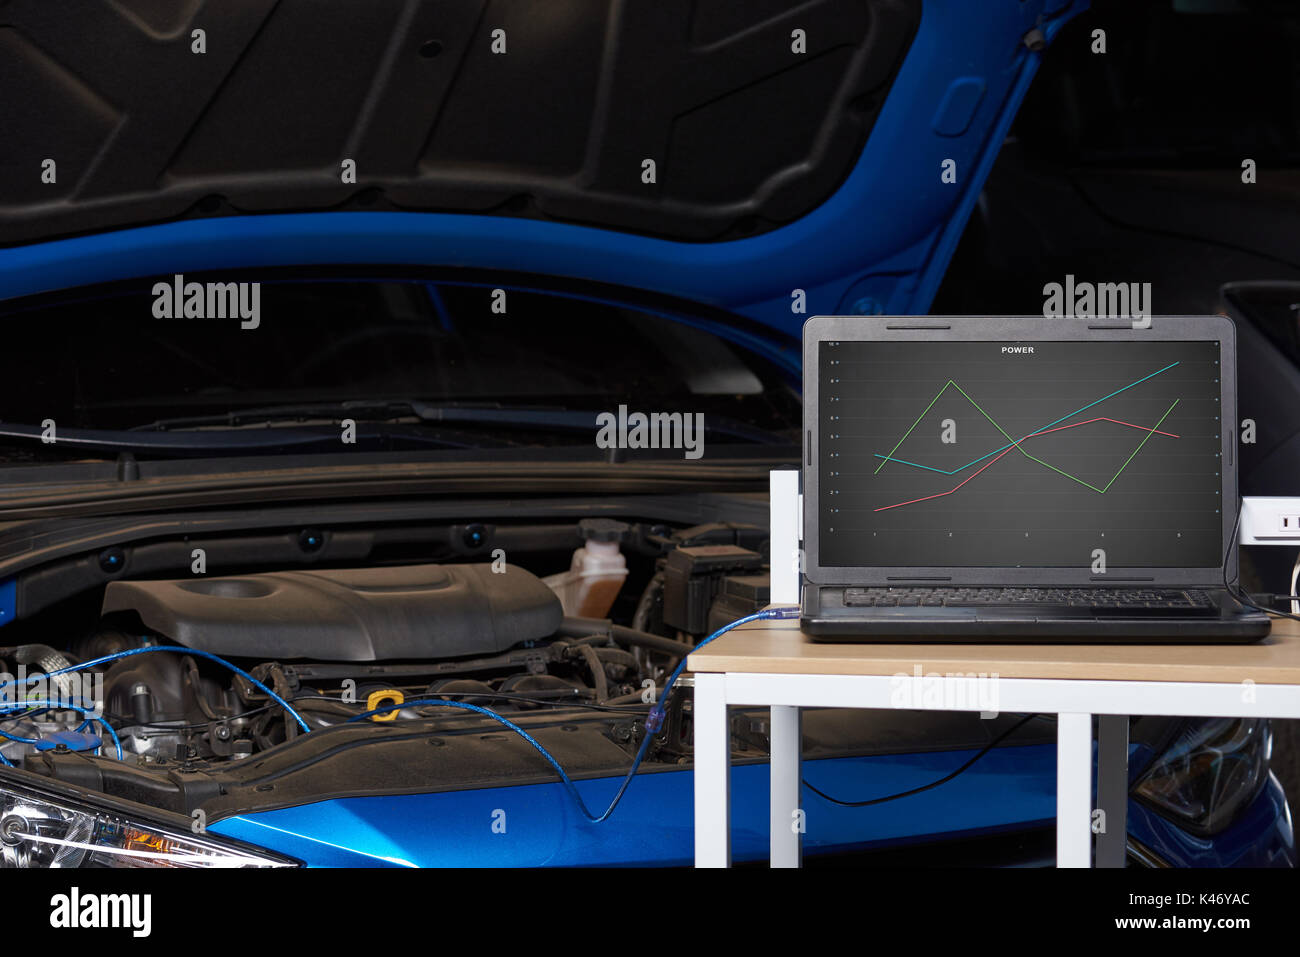 Car engine chip tuning station table with laptop on blue open hood vehicle background Stock Photo